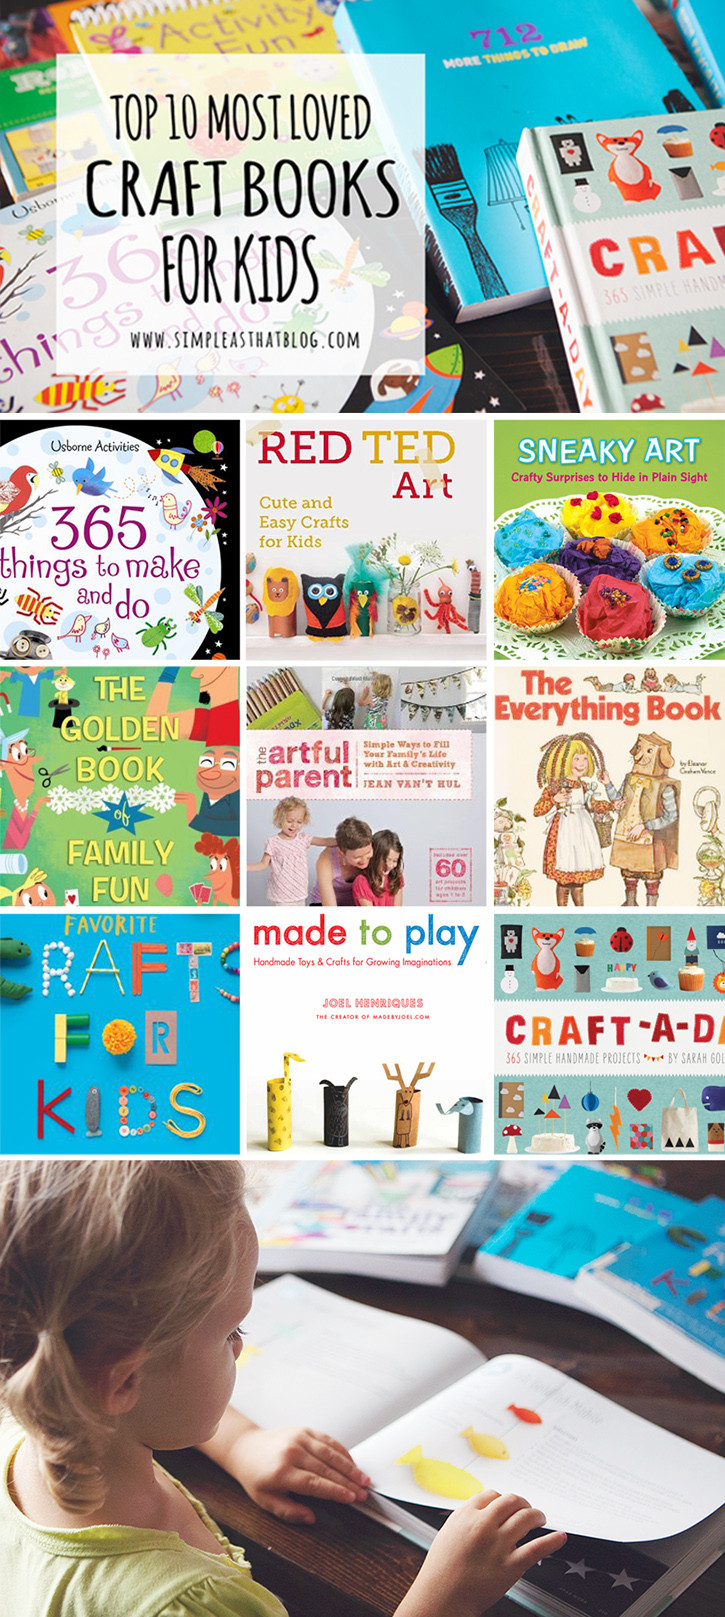 Kids Craft Book
 Top 10 Most Loved Craft Books for Kids